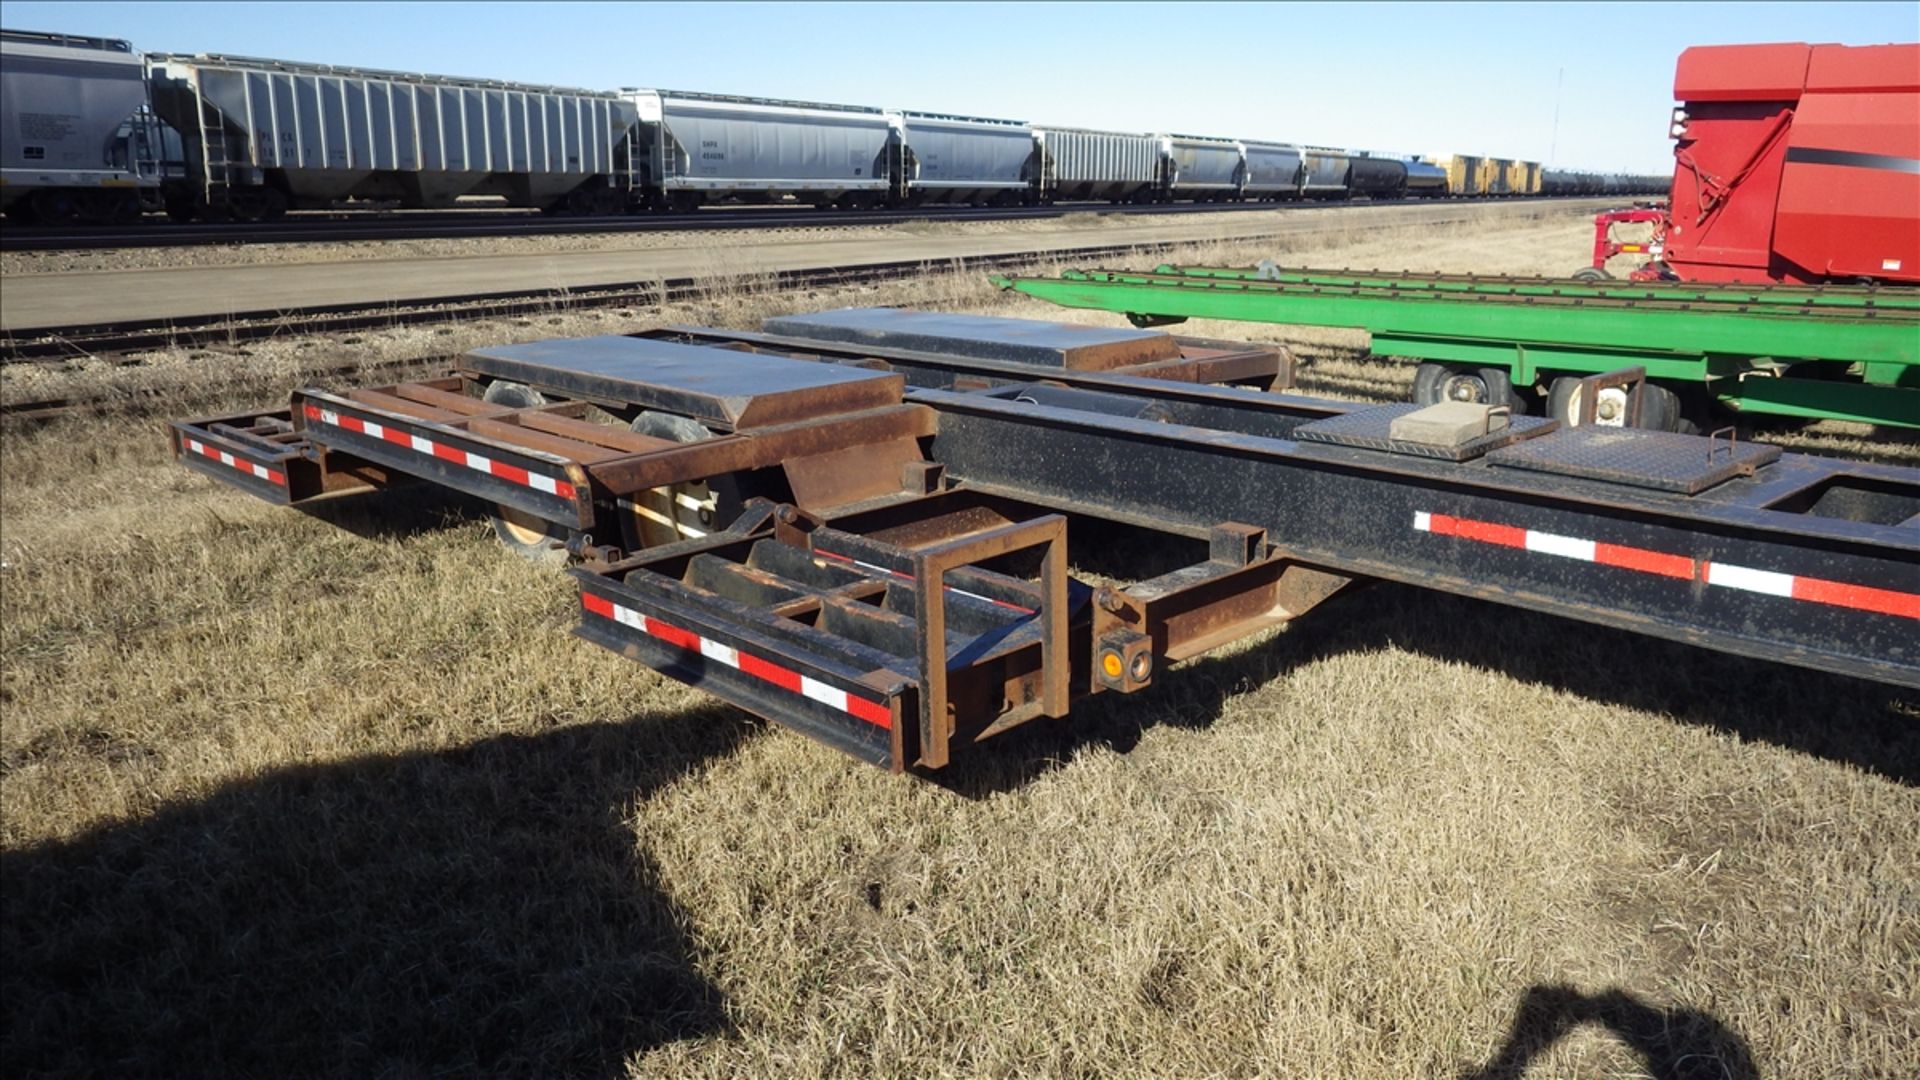 Trailtech Tandem Axle pintle hitch low boy sprayer transport trailer with pintle hitch at rear. Tire - Image 3 of 7